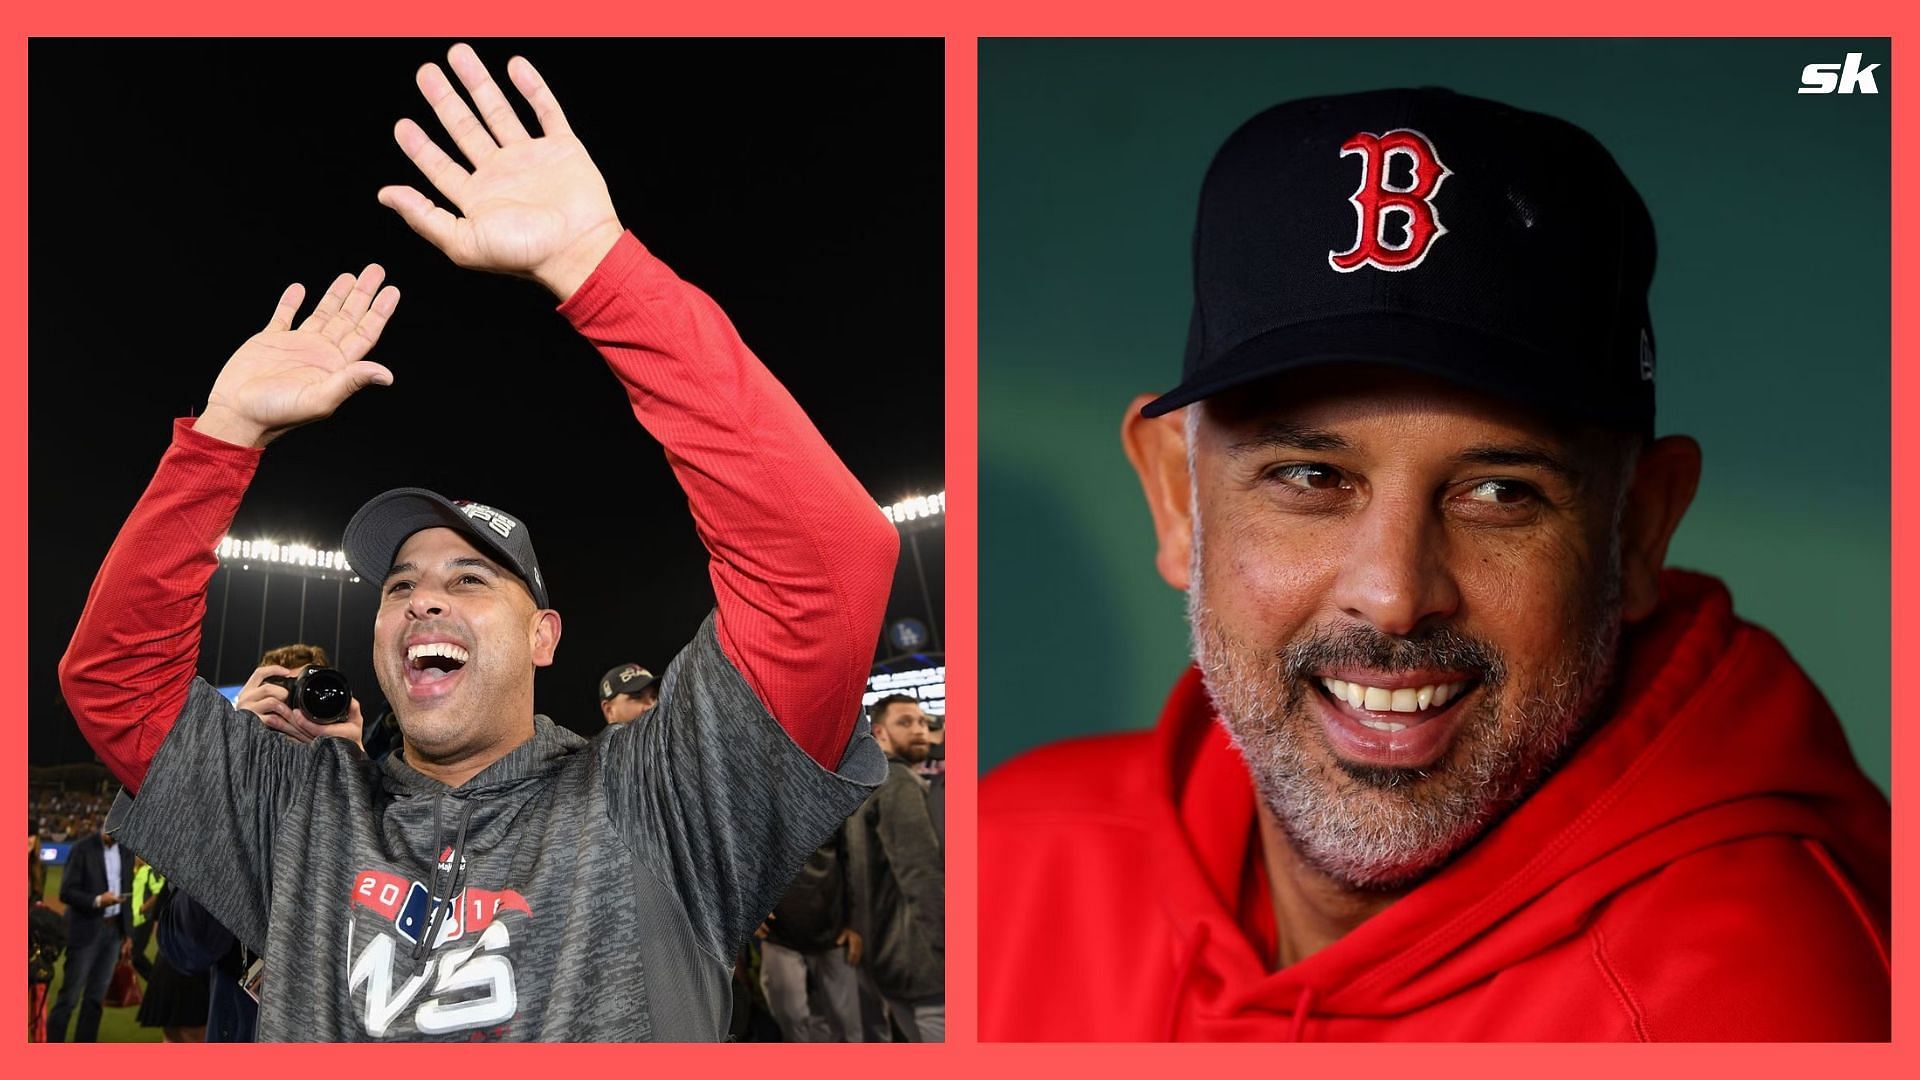 Alex Cora's Boston Red Sox must show they can win against a top AL